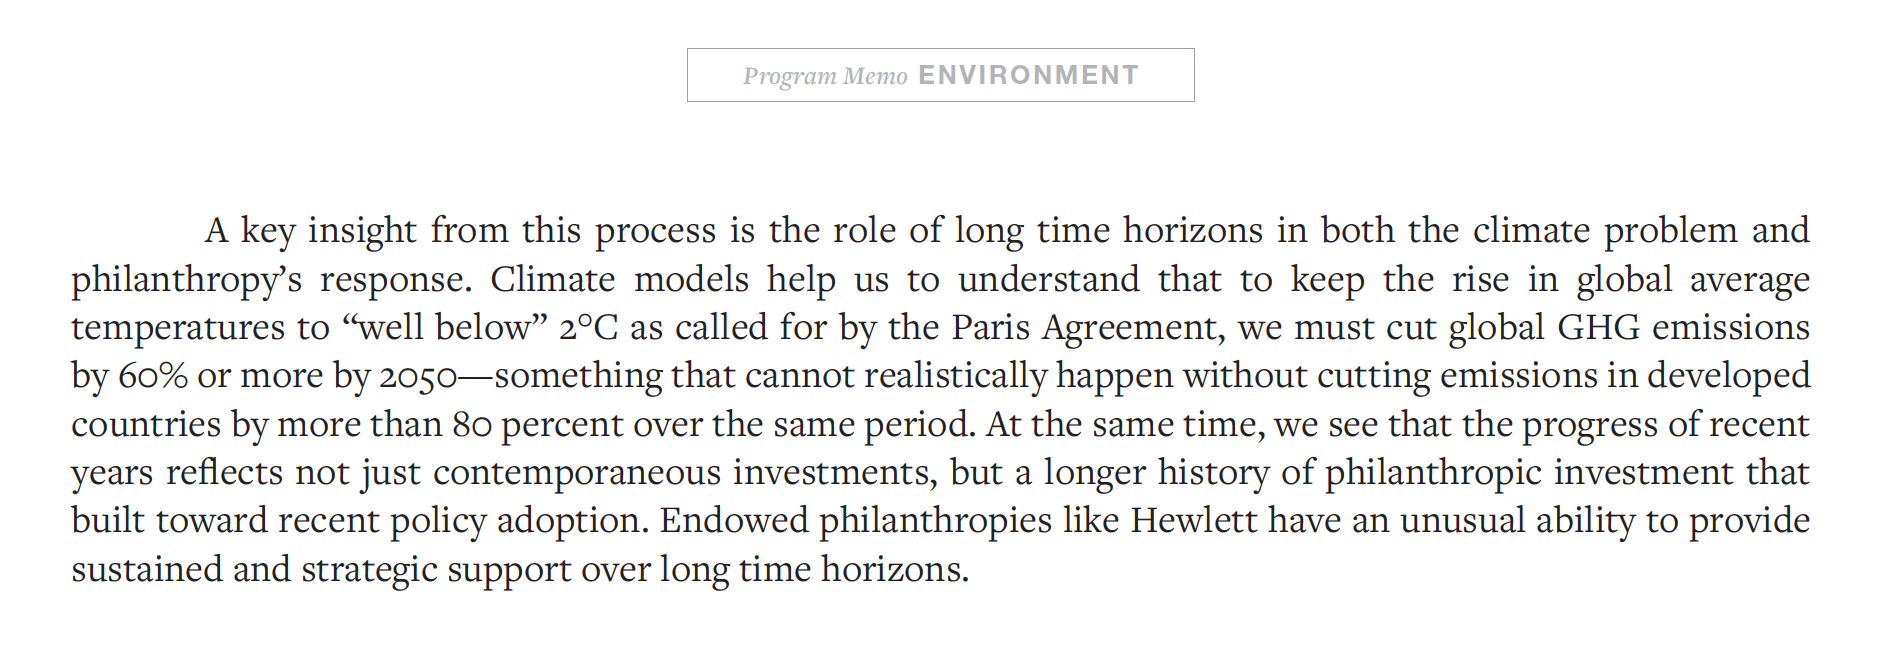 Excerpt from the Hewlett Foundation strategy document